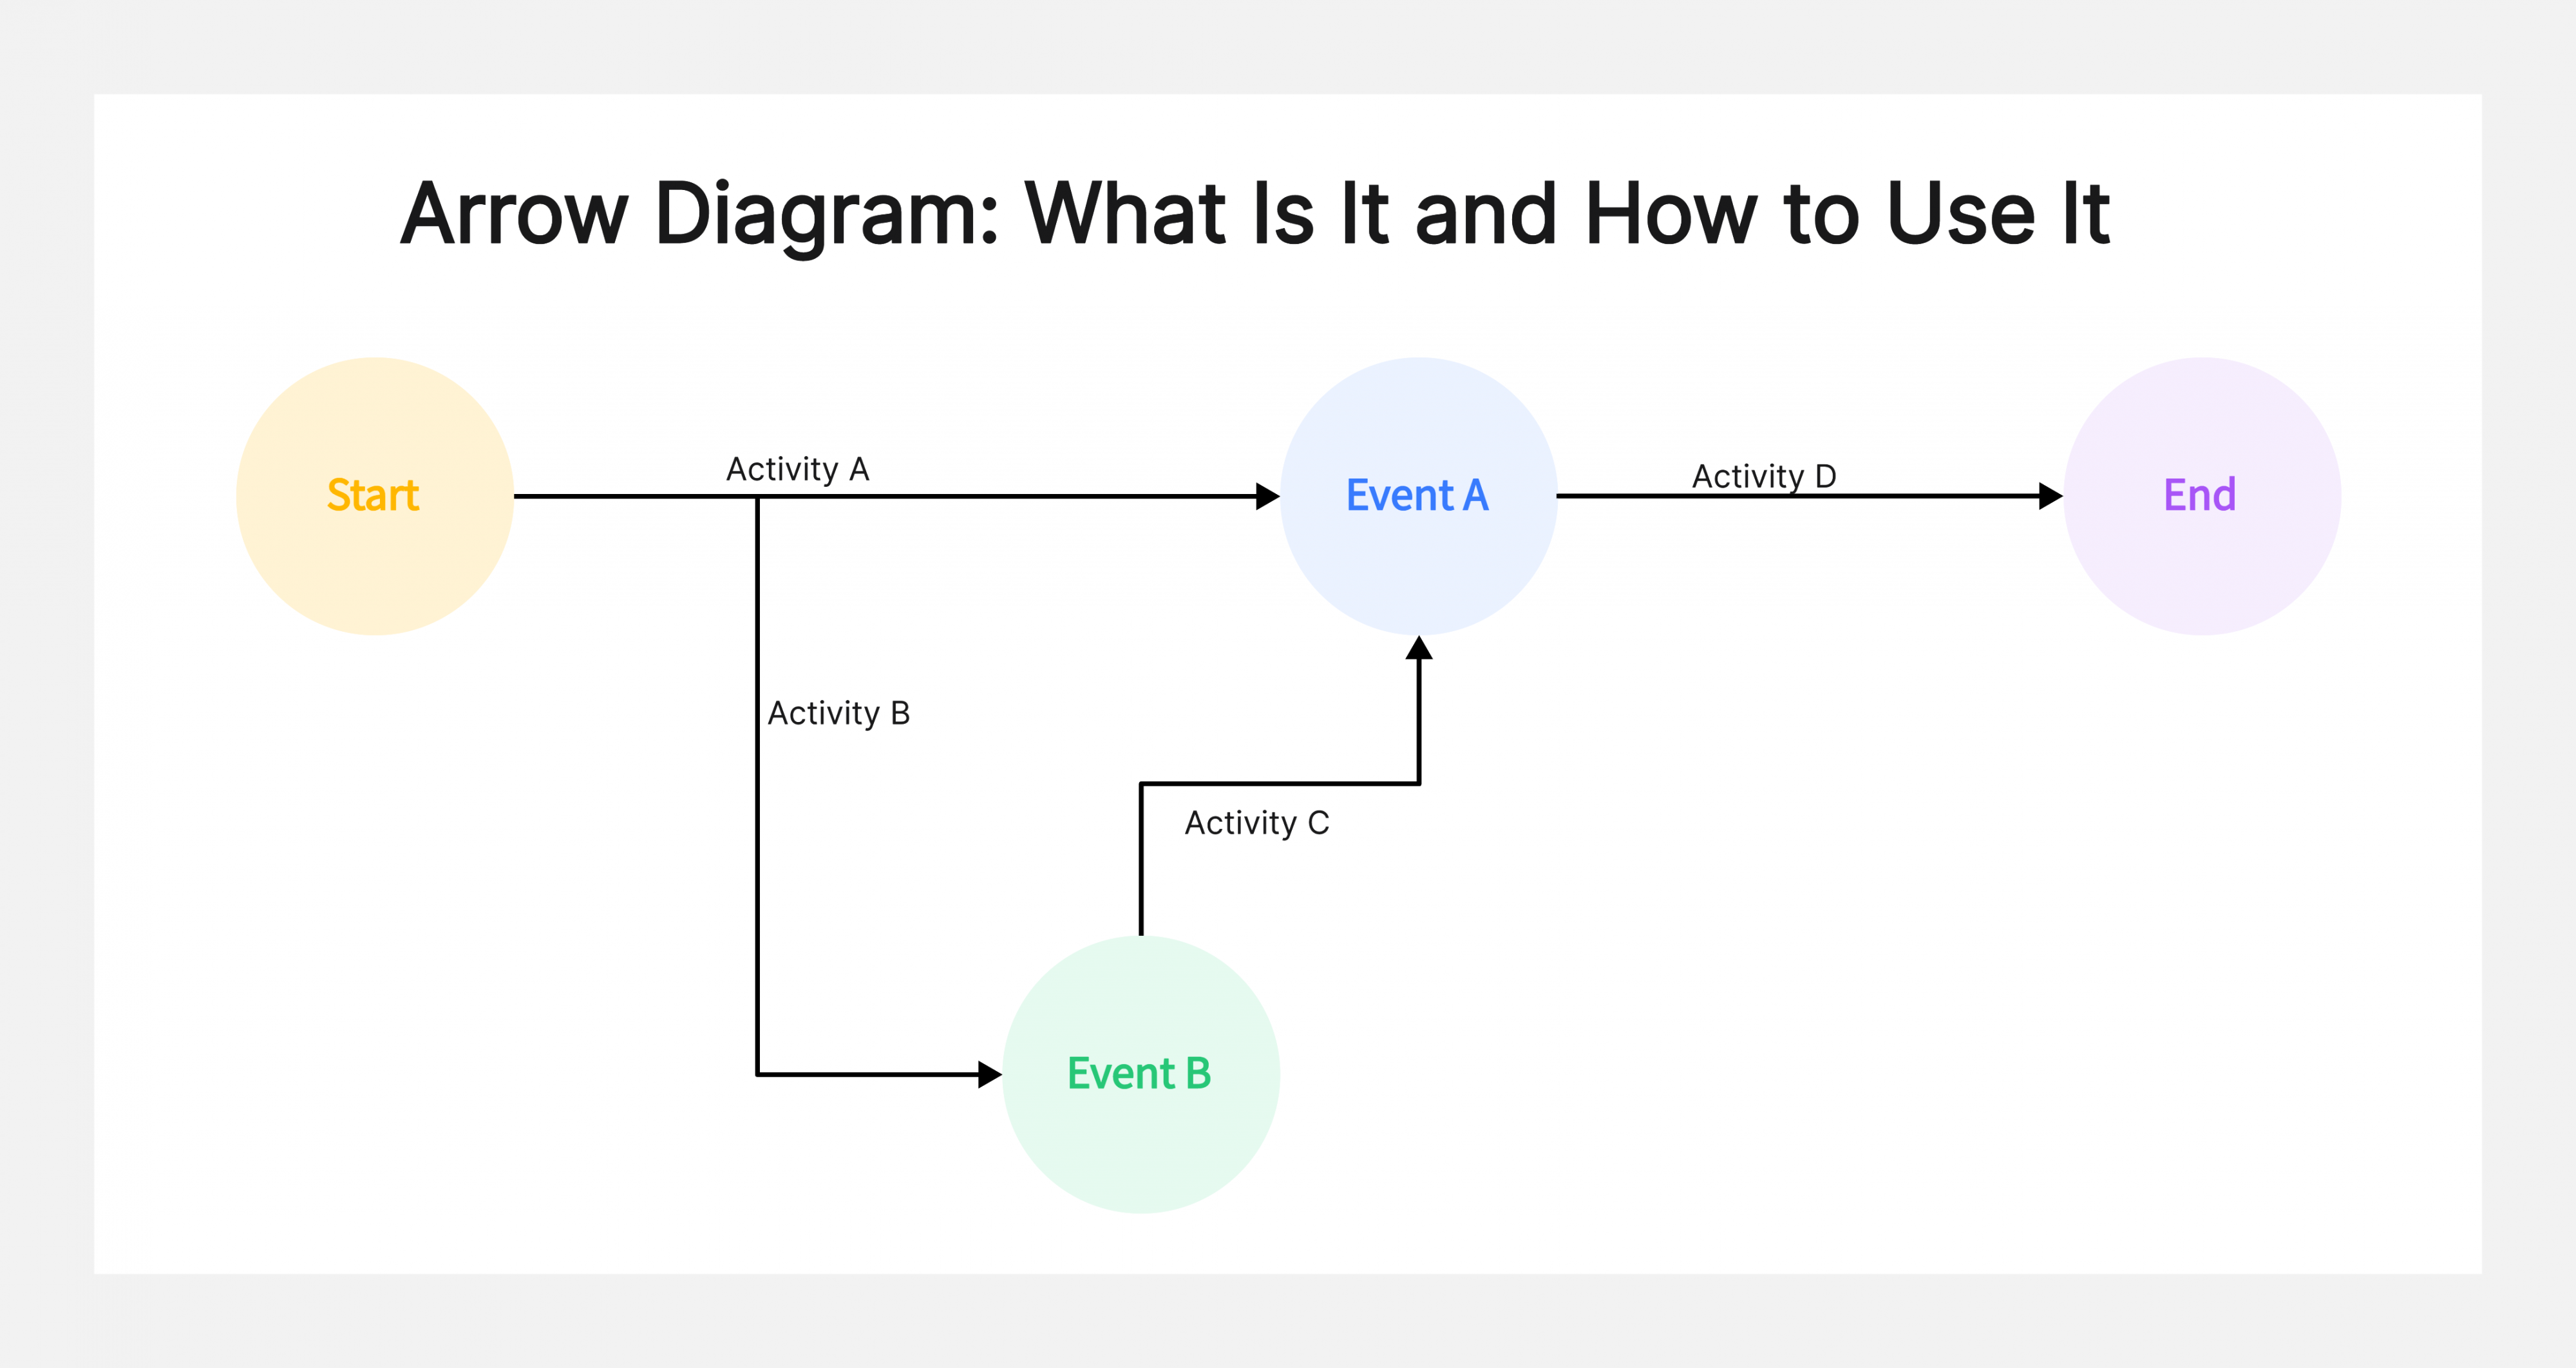 Arrow Diagrams: What They Are and How to Use Them